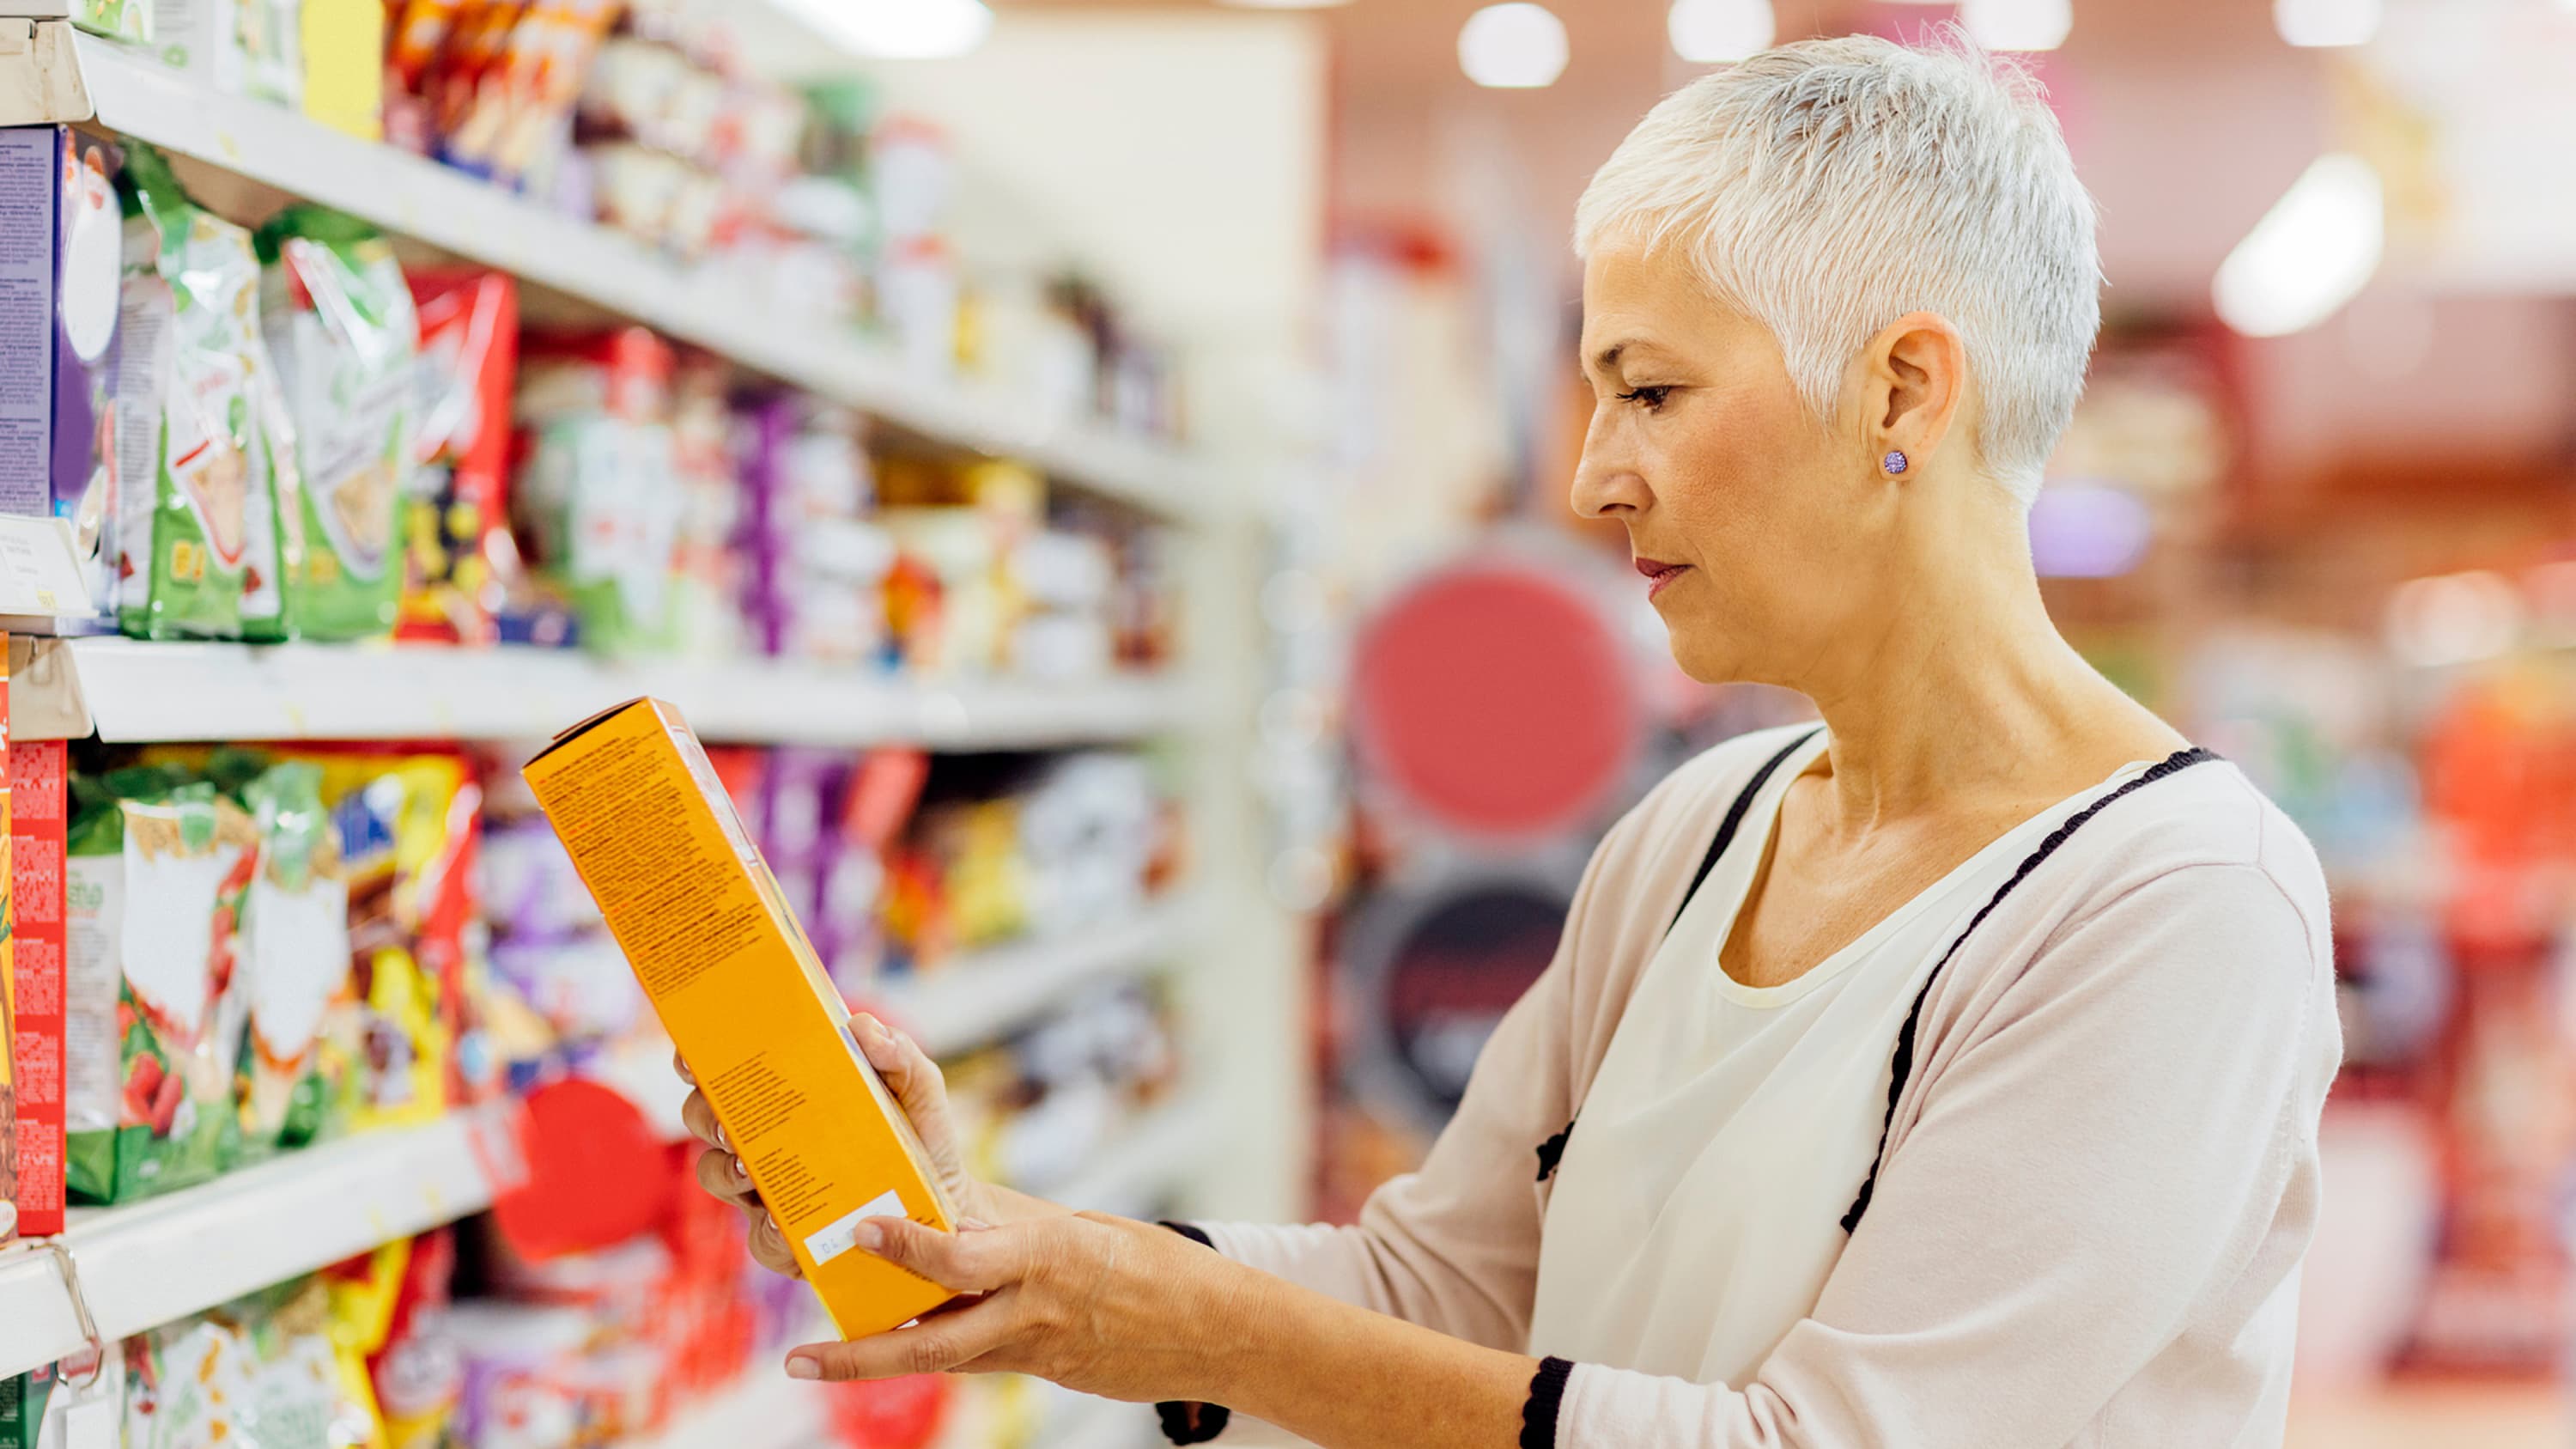 A woman examines a nutrition label, possibly for gluten.